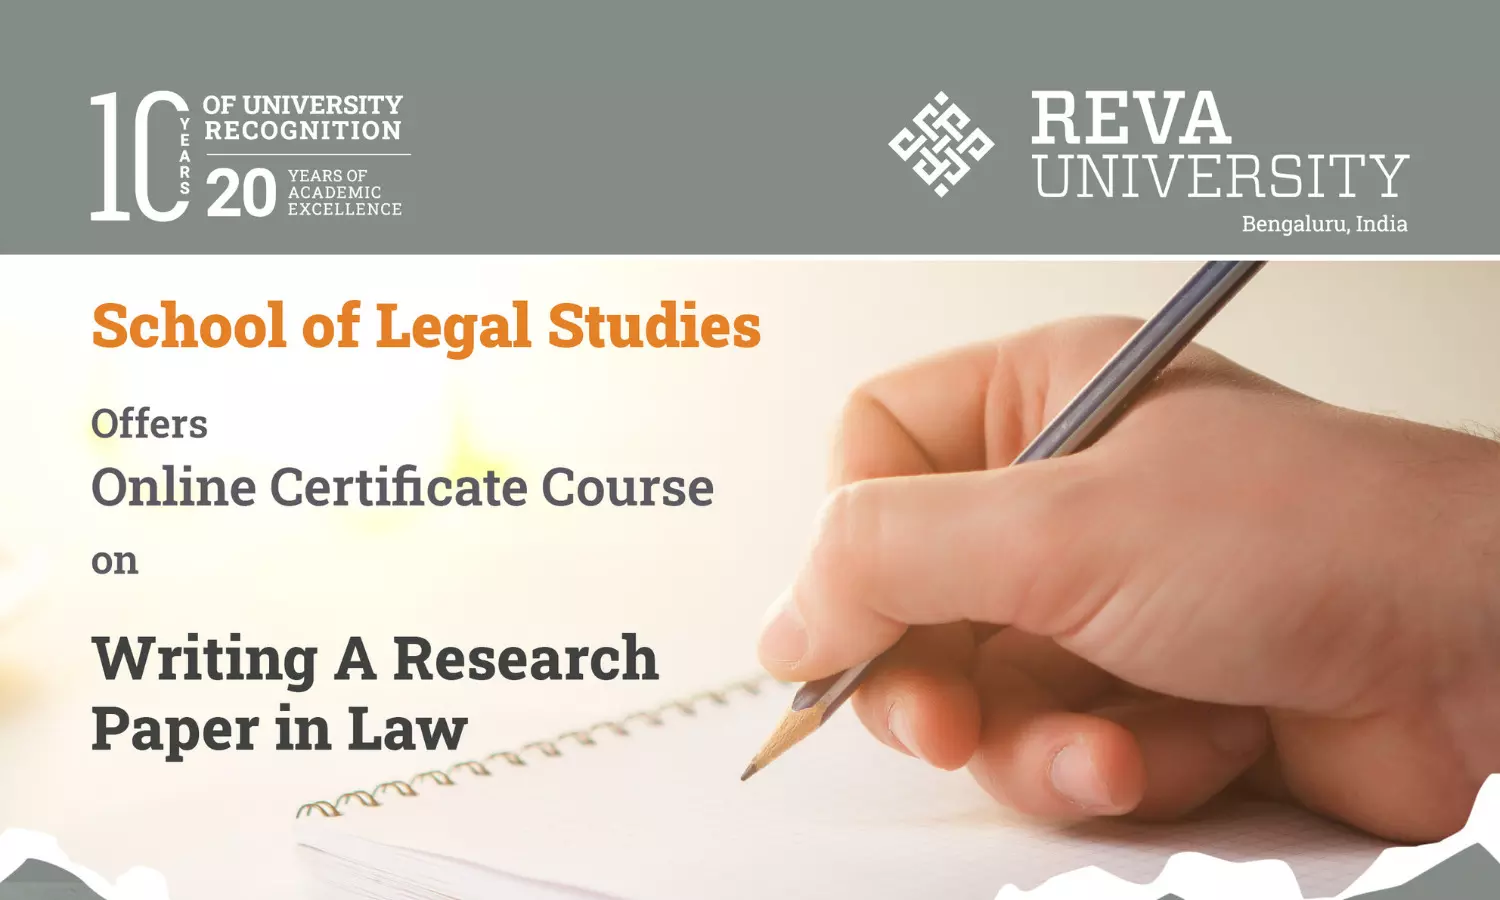 Online Certificate Course on Writing A Research Paper in Law | School of Legal Studies, REVA University | March 1, 2023.